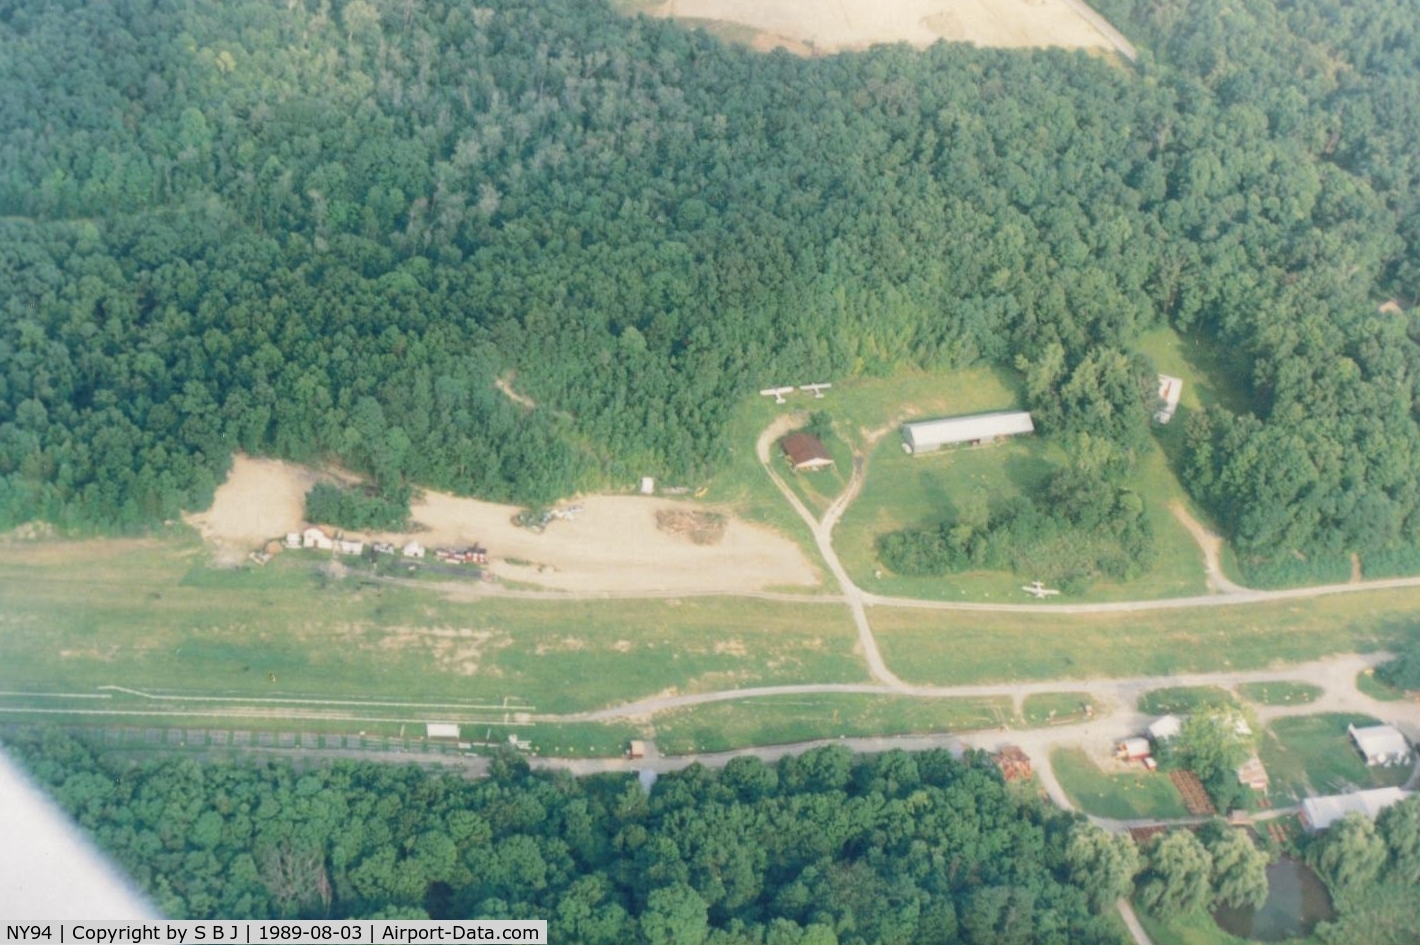 Old Rhinebeck Airport (NY94) - Old Rhinebeck-What can you say. Picture in 1989.